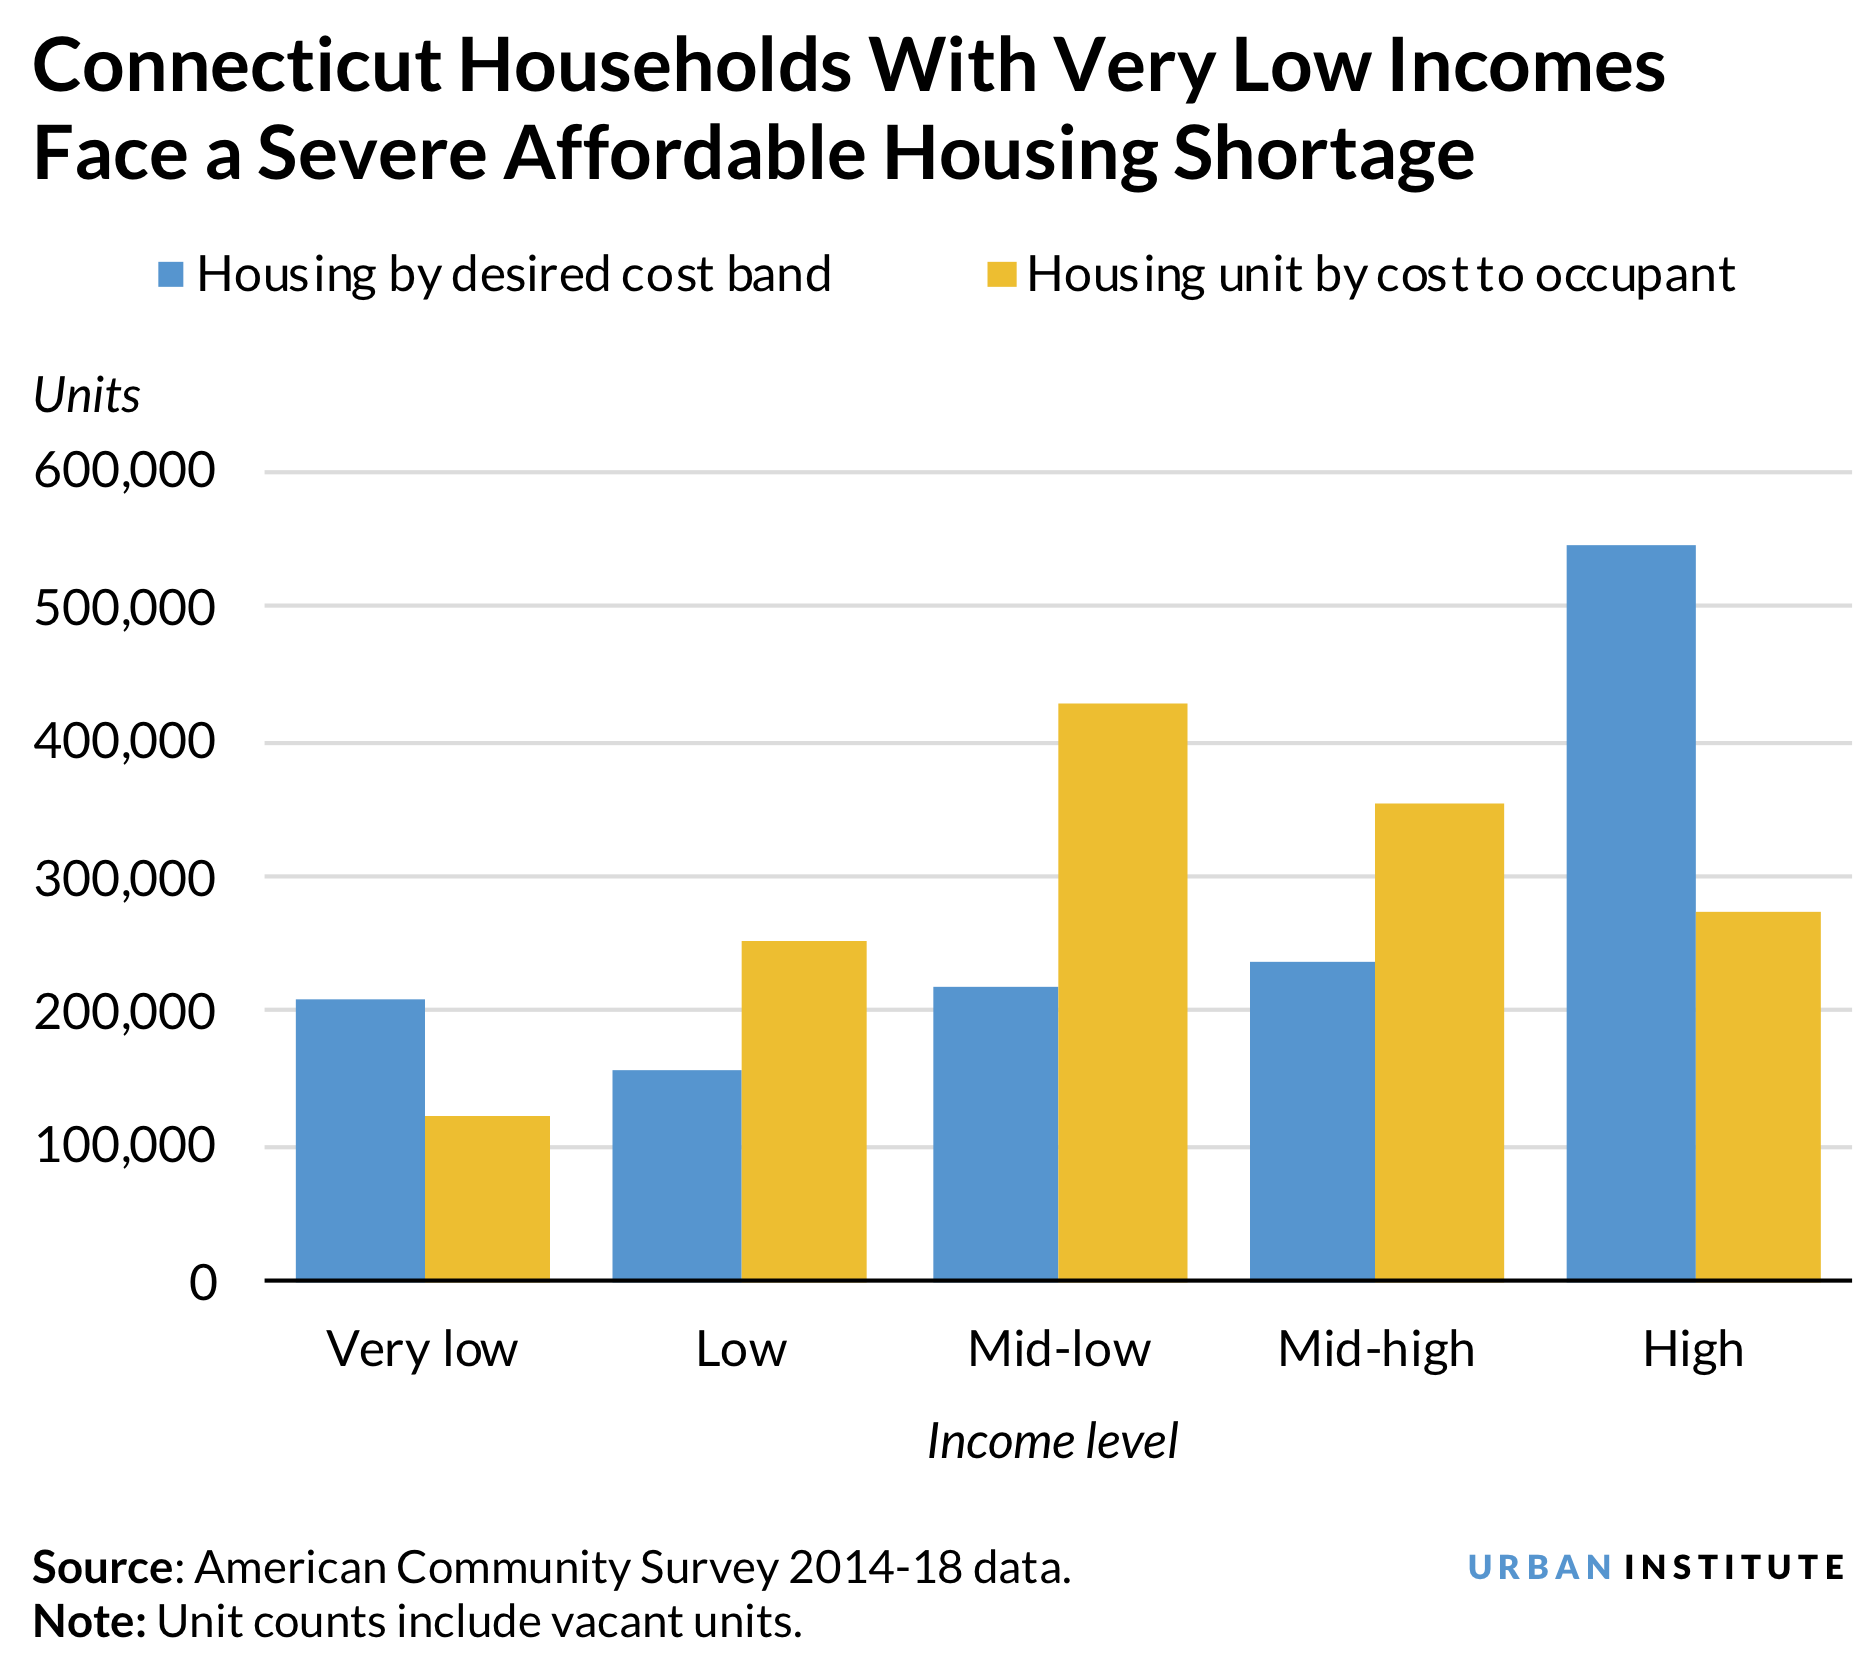 Bar chart showing Connecticut households with very low incomes face a severe affordable housing shortage